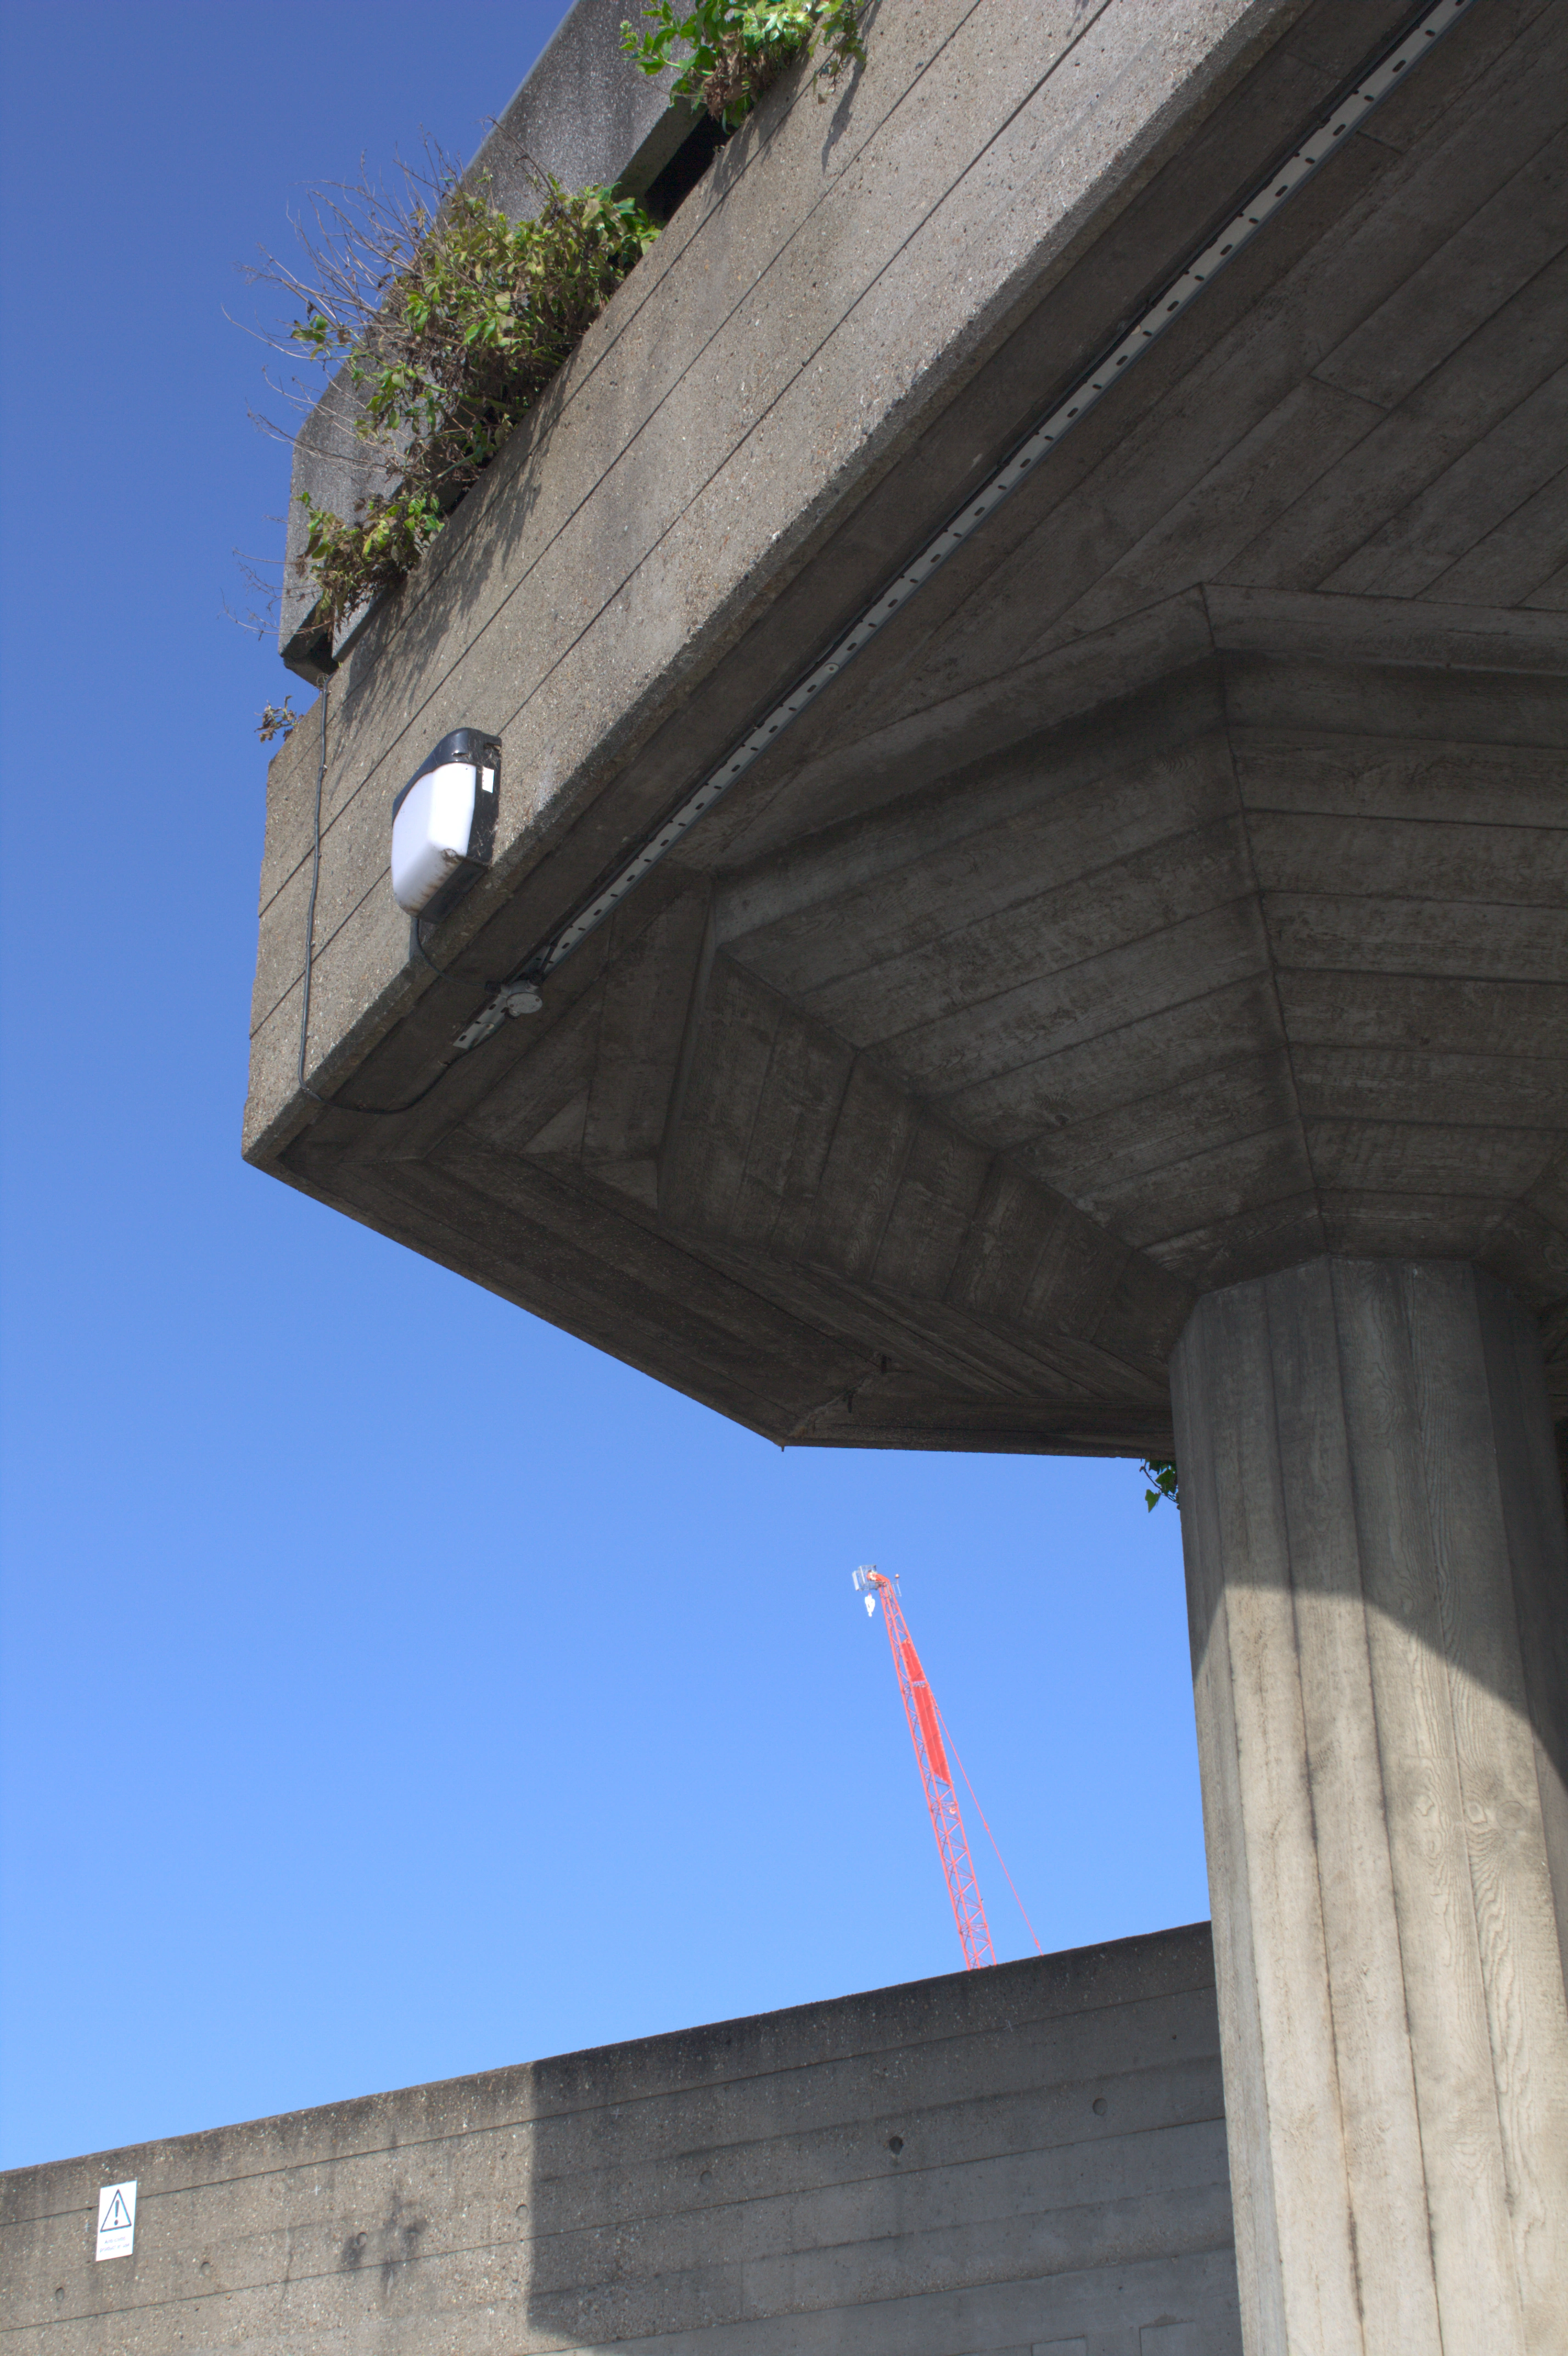 Concrete overhang with greenery growing at the top, and a bright red crane in the distance